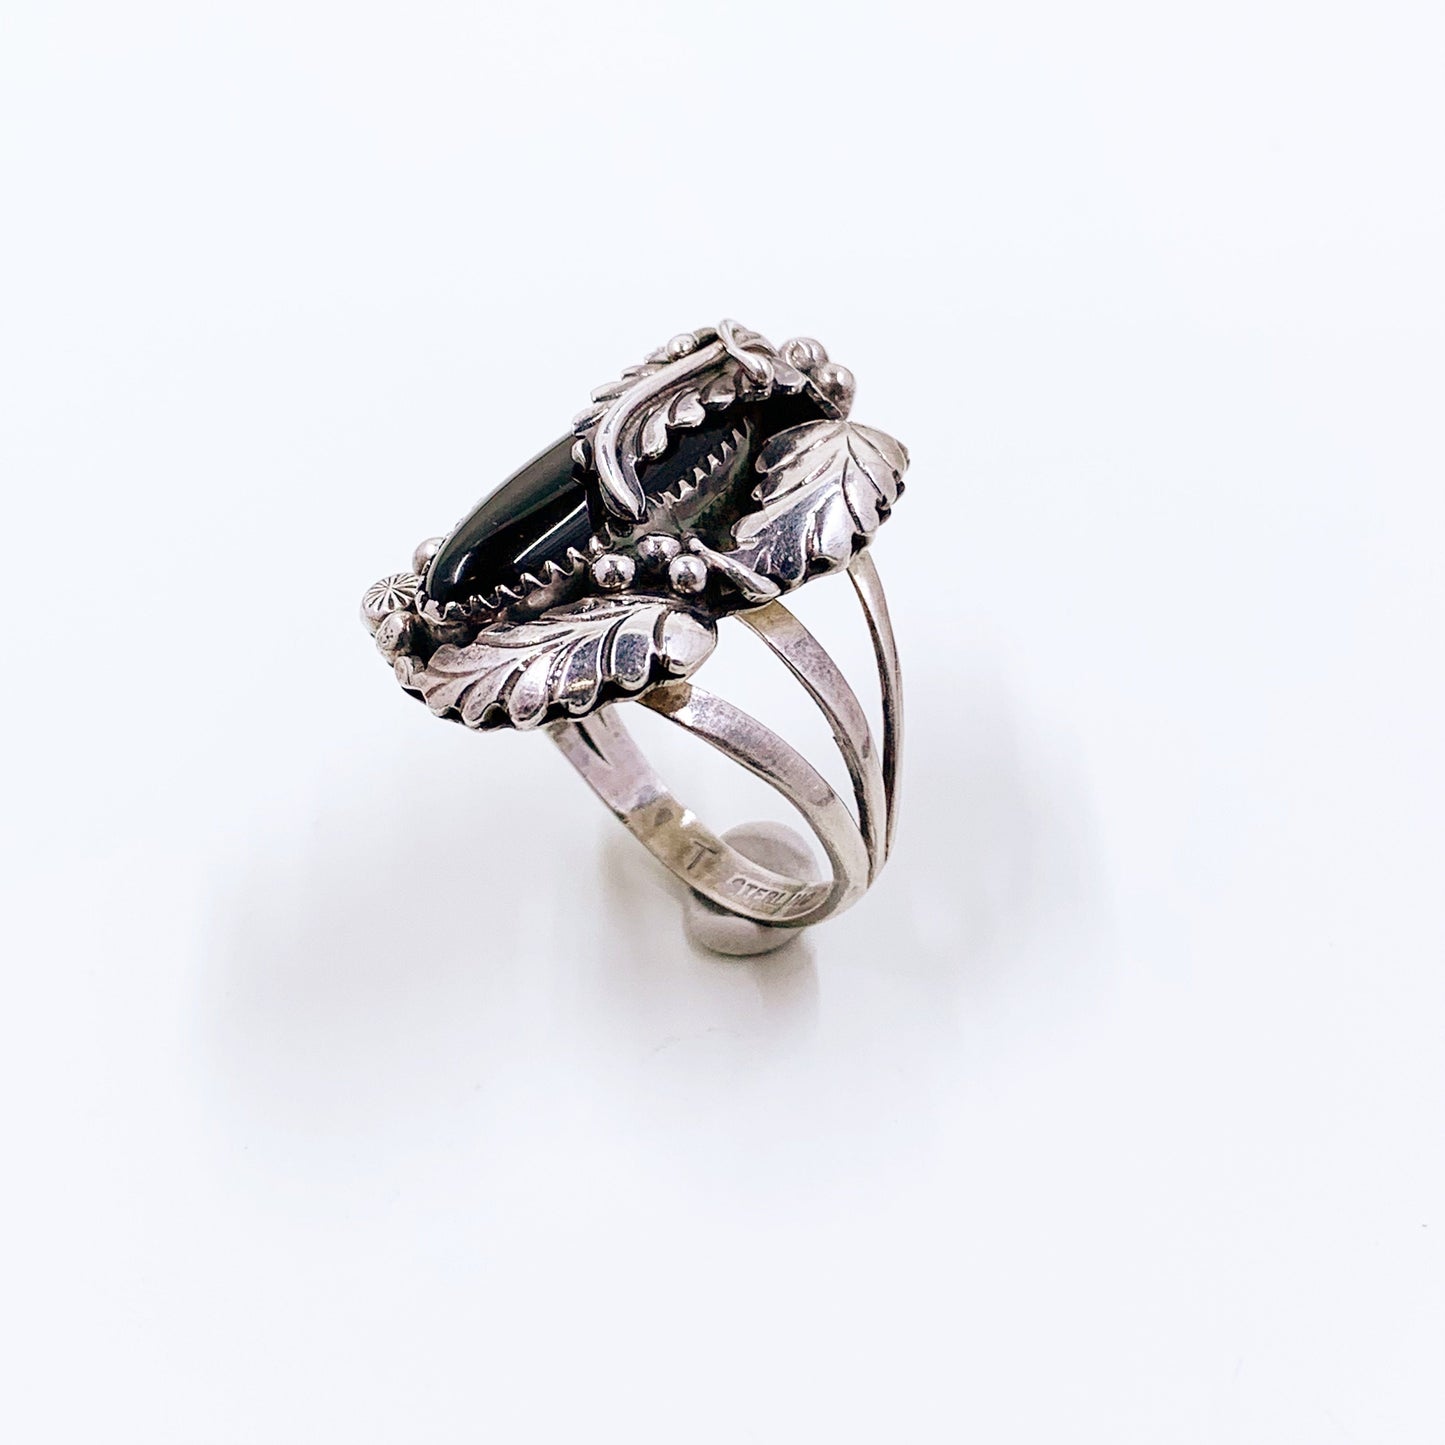 Signed Native American Sterling Onyx Leaf Ring | Mary and Richard Thomas Navajo Ring | Size 9.25 Ring